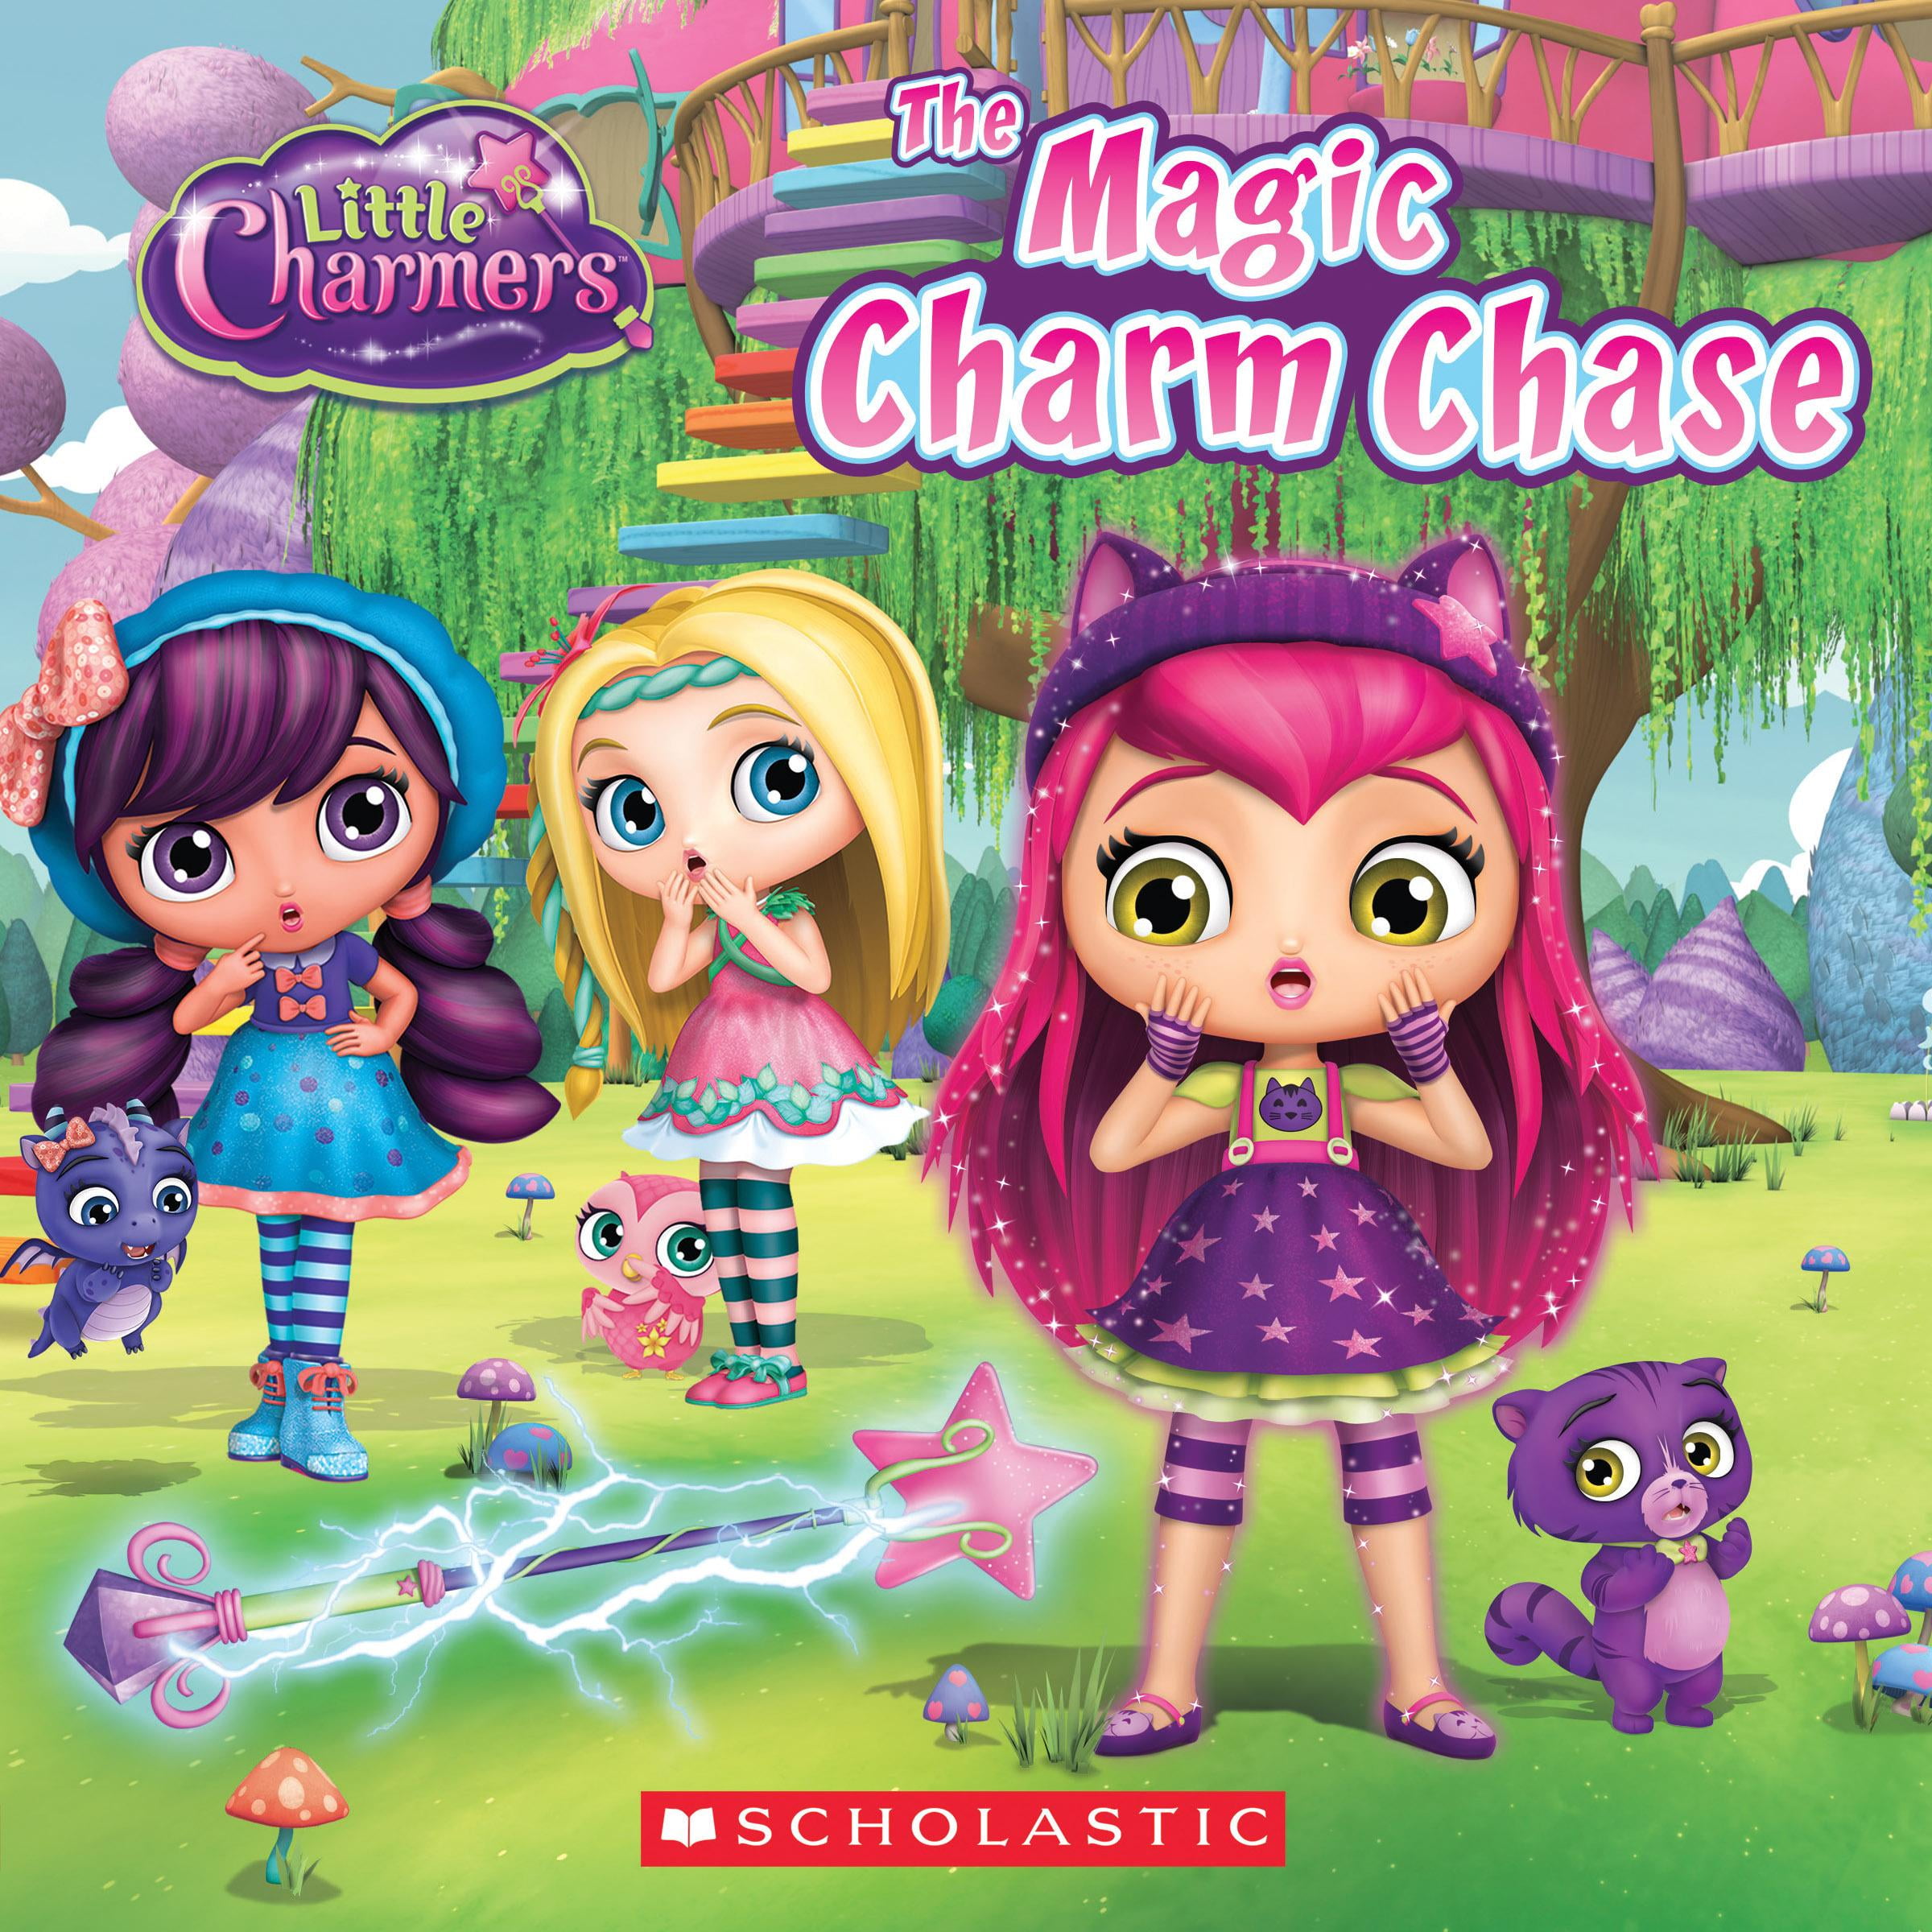 The Magic Charm Chase (Little Charmers: 8x8 Storybook) - Walmart.com